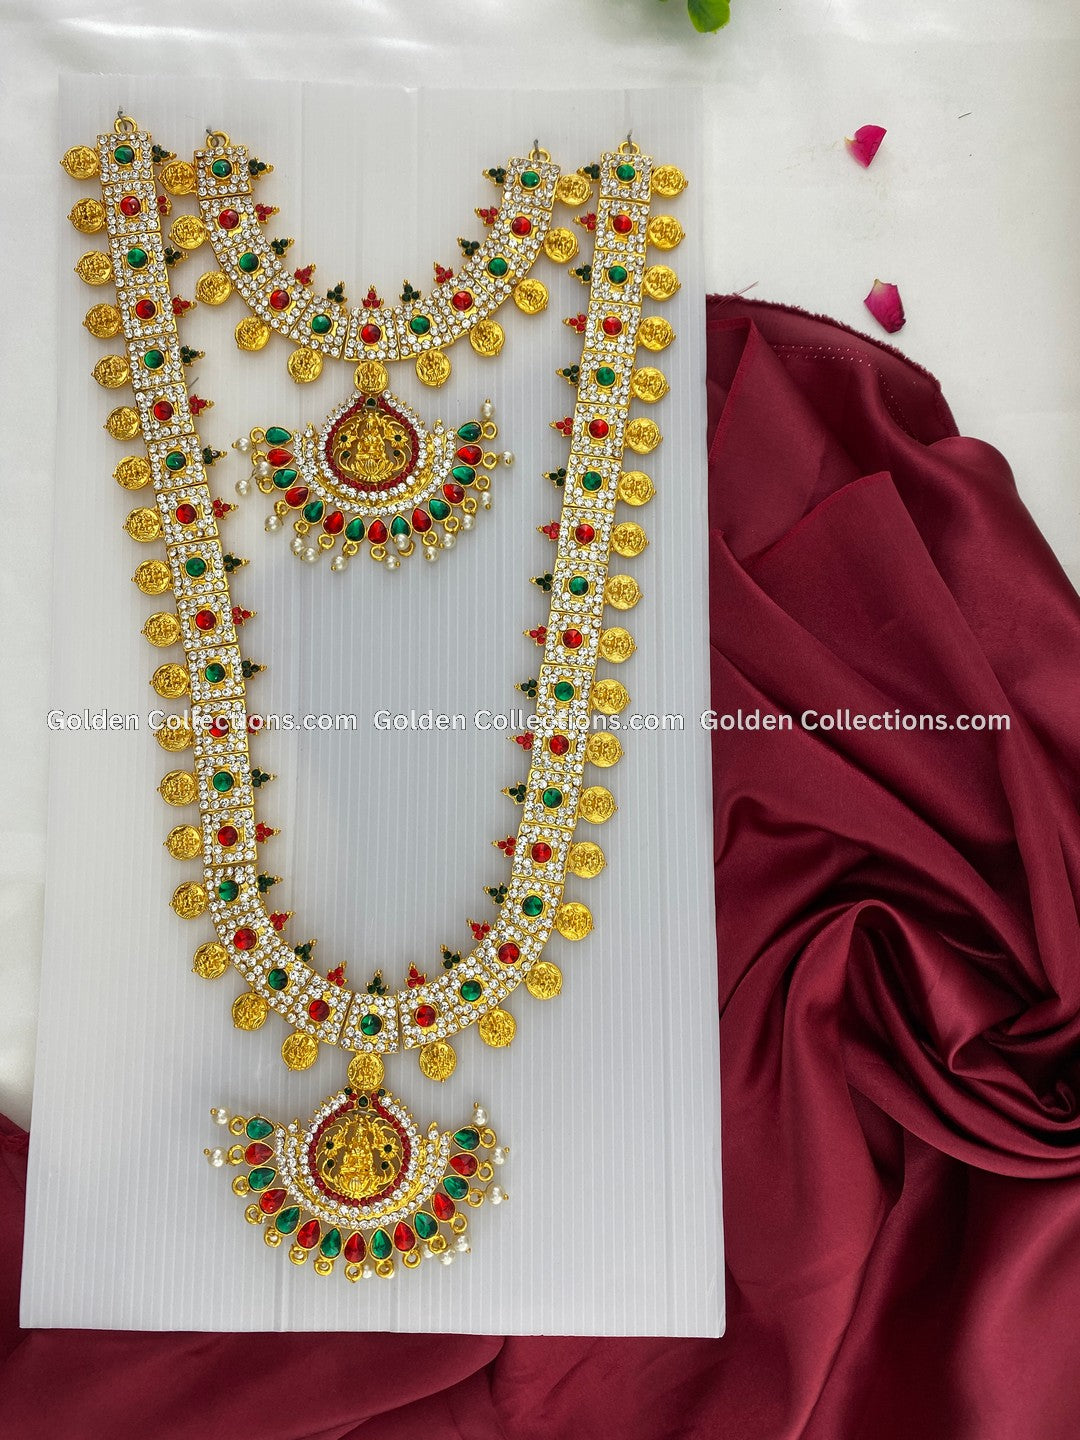 Goddess Lakshmi Jewellery Collection-GoldenCollections